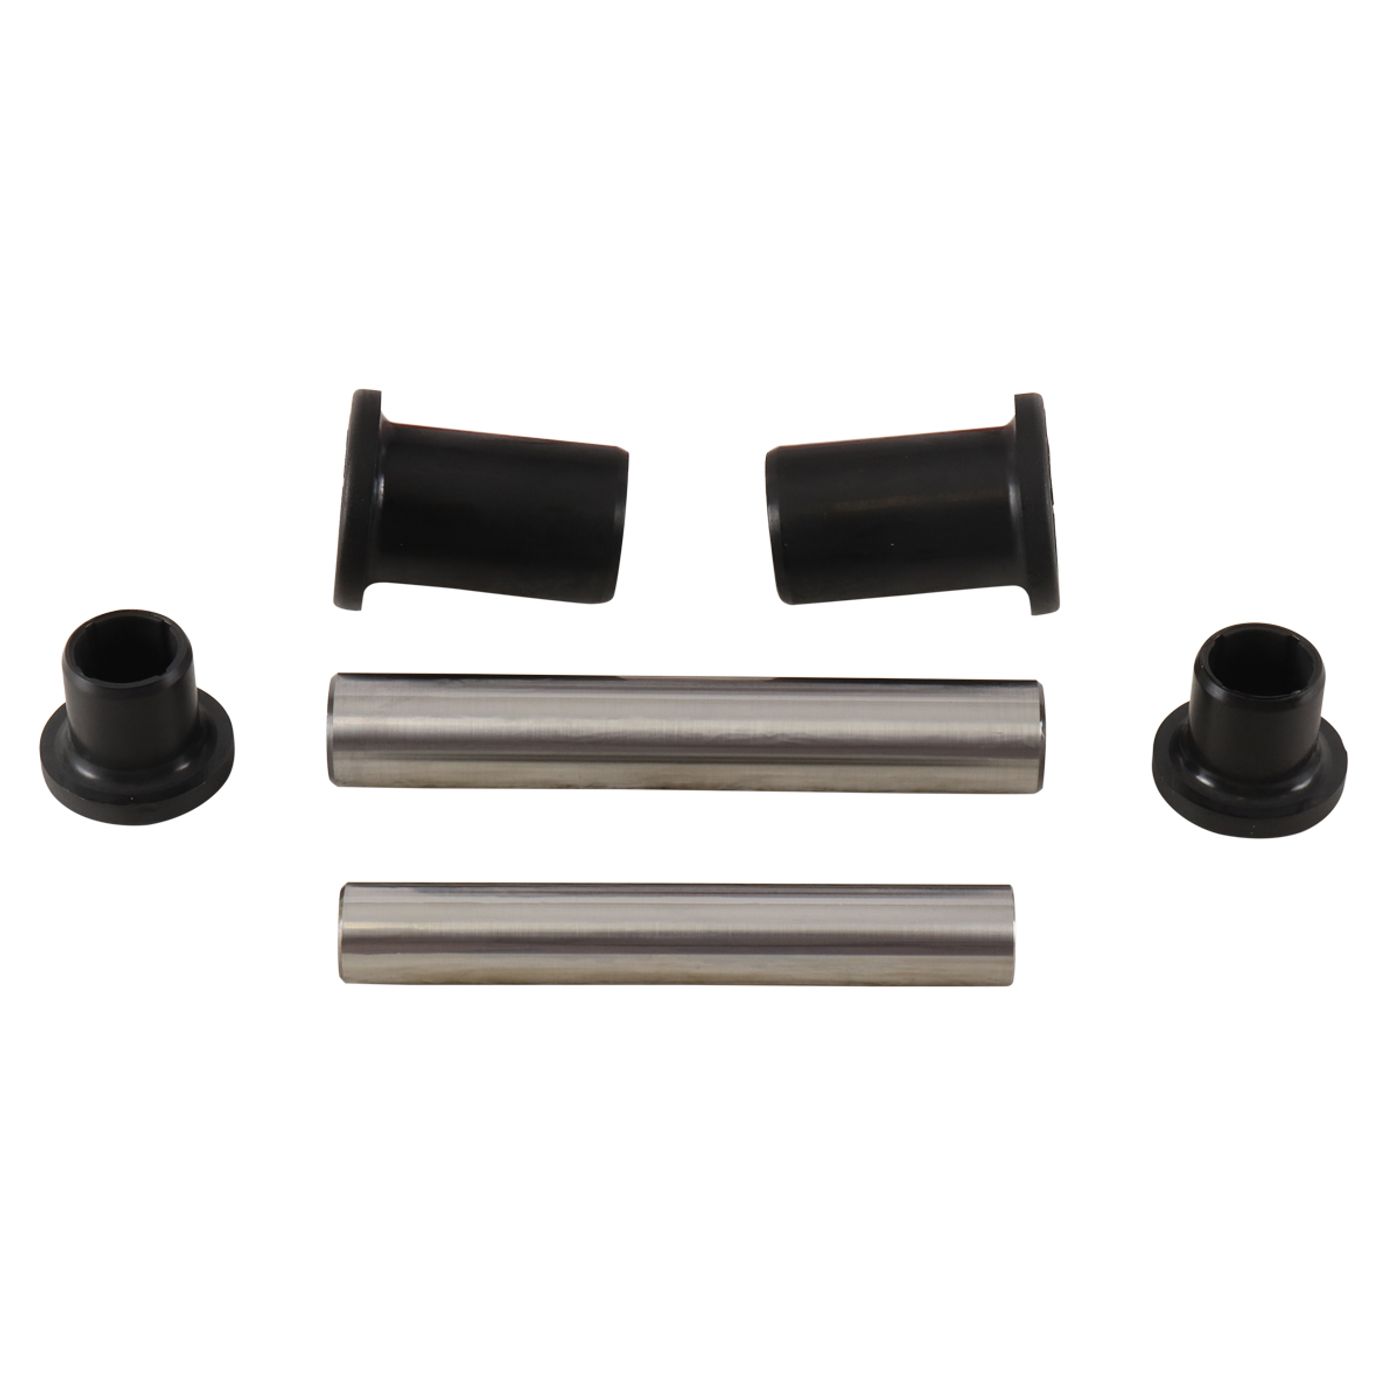 Wrp Rear Ind. Suspension Kits - WRP501209 image